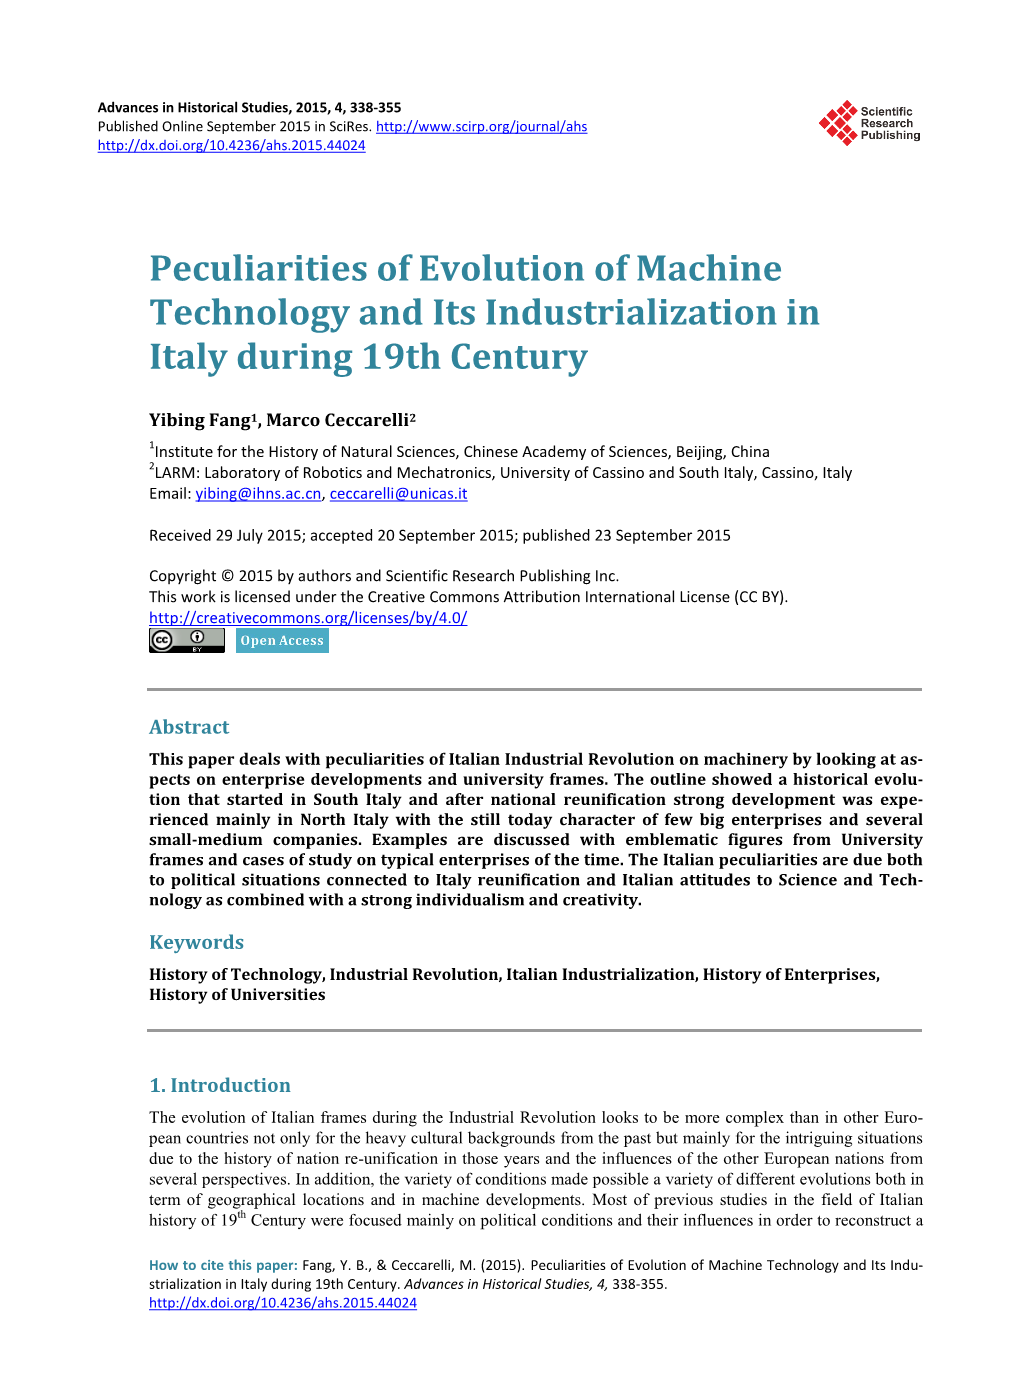 Peculiarities of Evolution of Machine Technology and Its Industrialization in Italy During 19Th Century